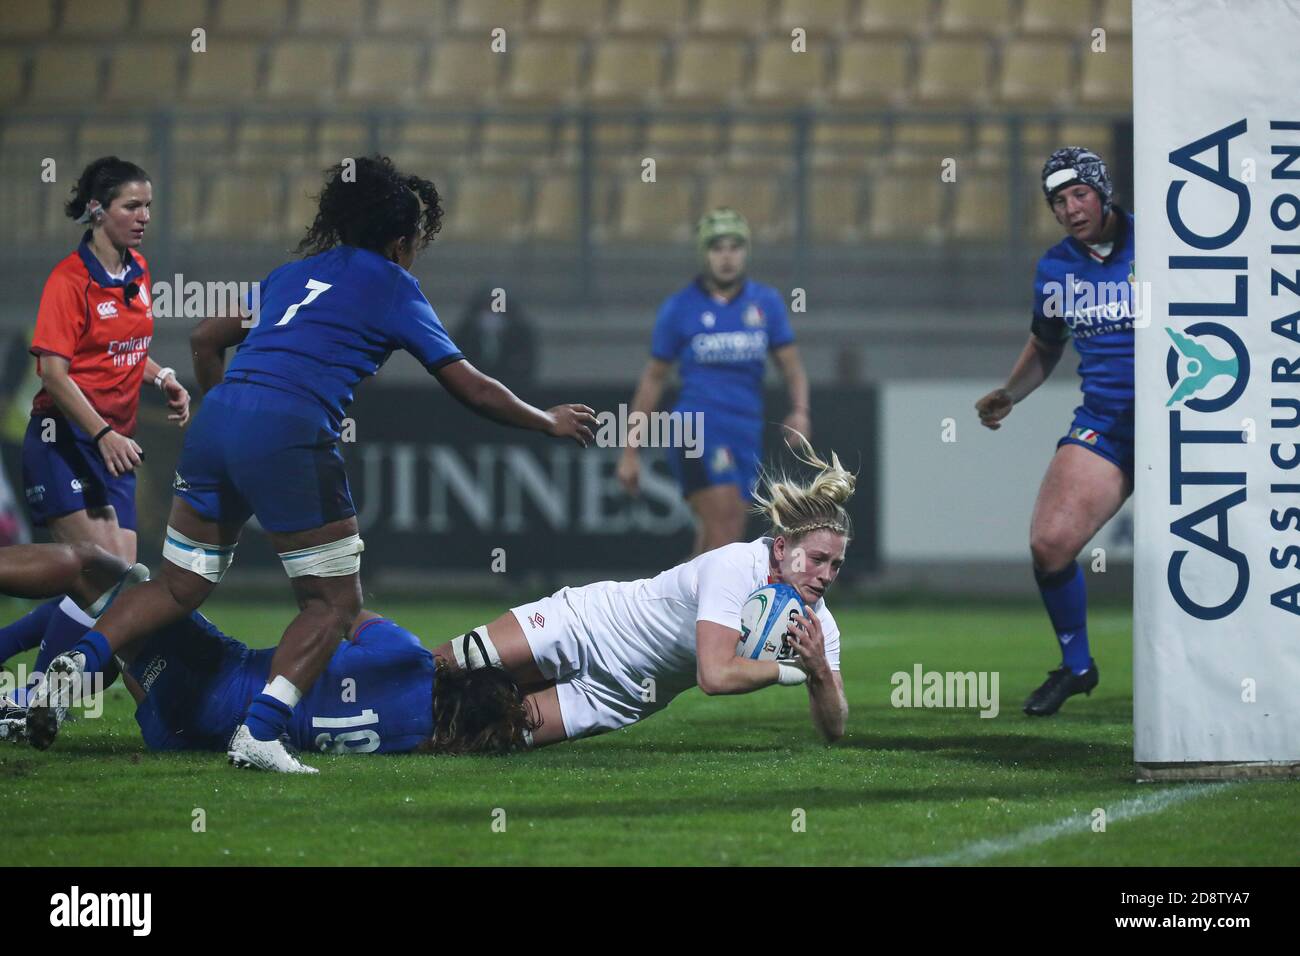 Parma, Italy. 1st Nov, 2020. parma, Italy, Sergio Lanfranchi stadium, 01 Nov 2020, Alex Matthews (England) is tackled near the touch line during Women 2020 - Italy vs England - Rugby Six Nations match - Credit: LM/Massimiliano Carnabuci Credit: Massimiliano Carnabuci/LPS/ZUMA Wire/Alamy Live News Stock Photo